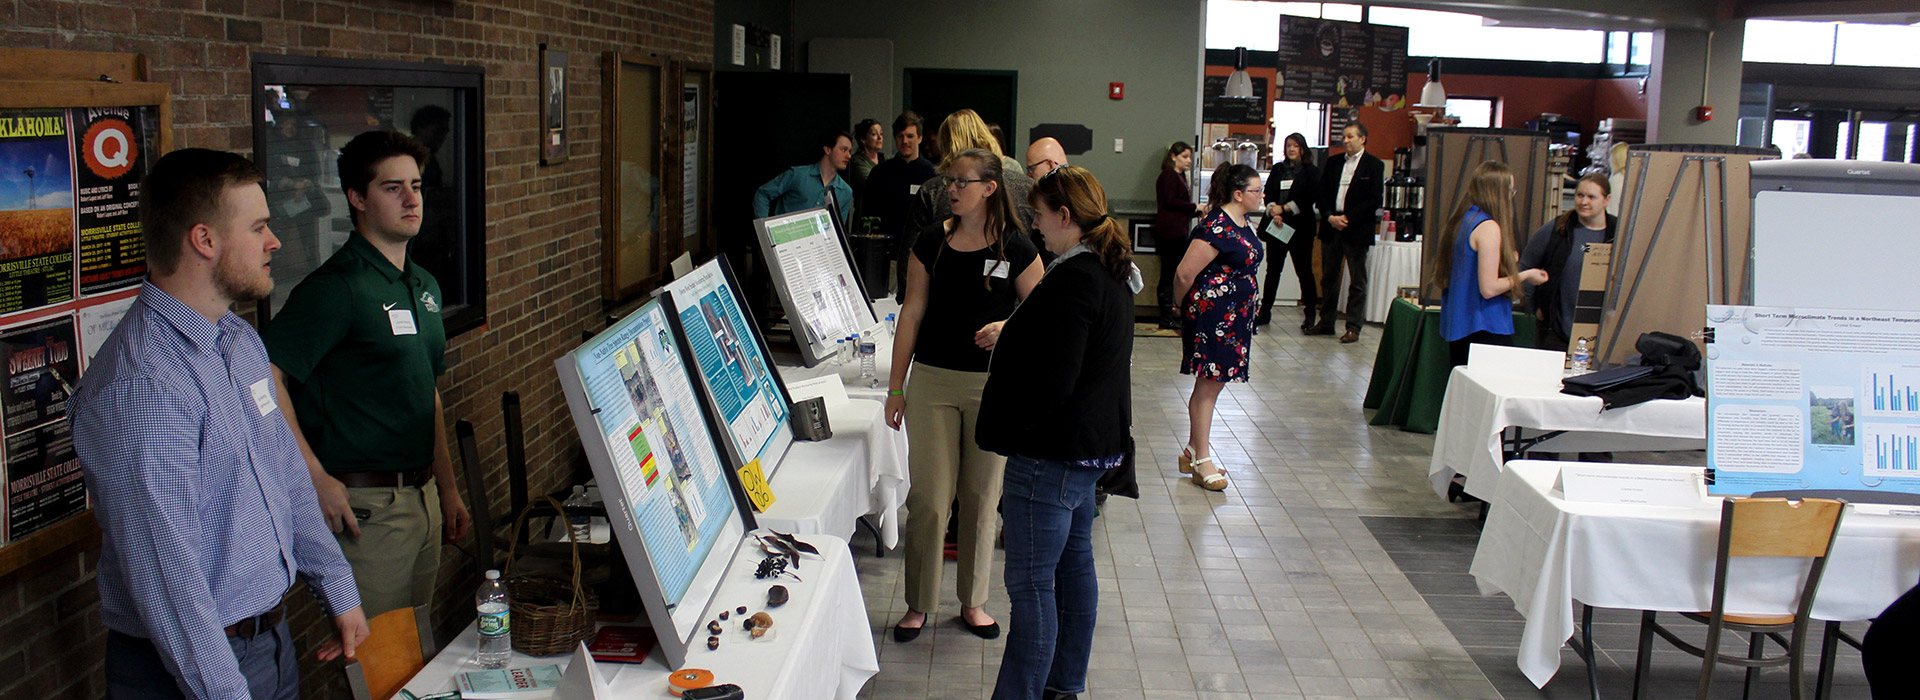 Students, faculty and staff attend an in-person showcase